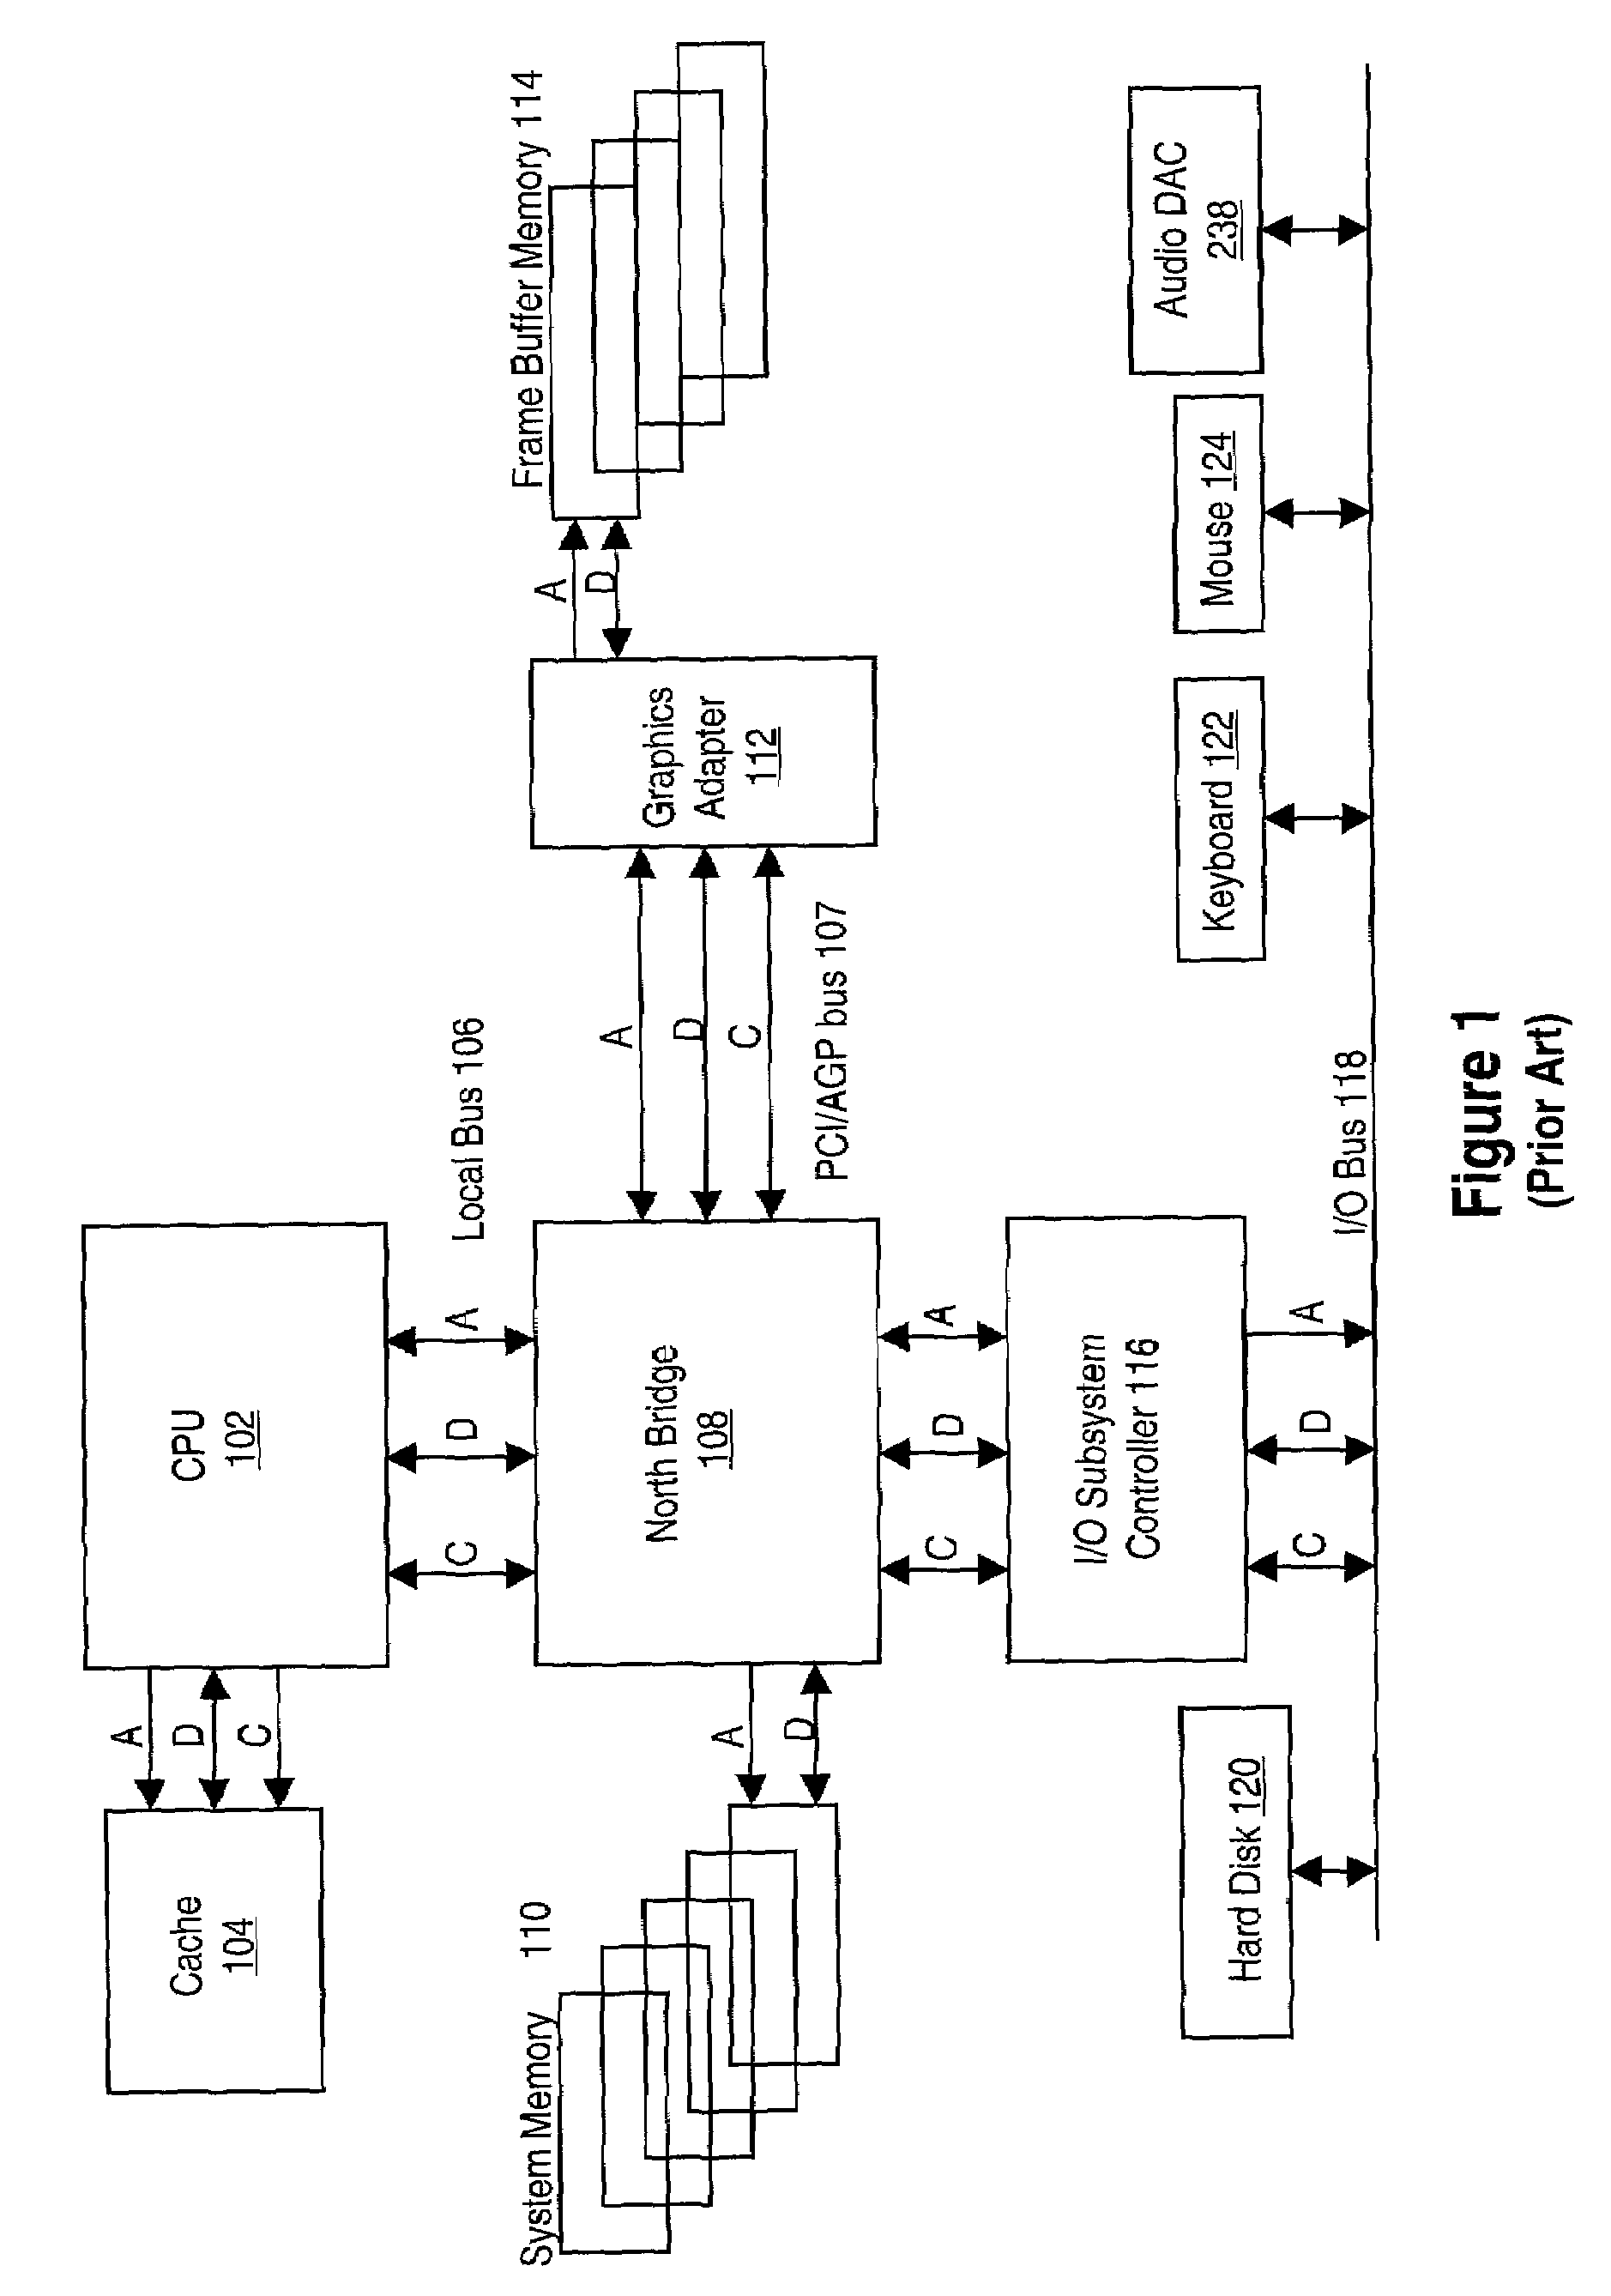 System and method for performing scalable embedded parallel data decompression